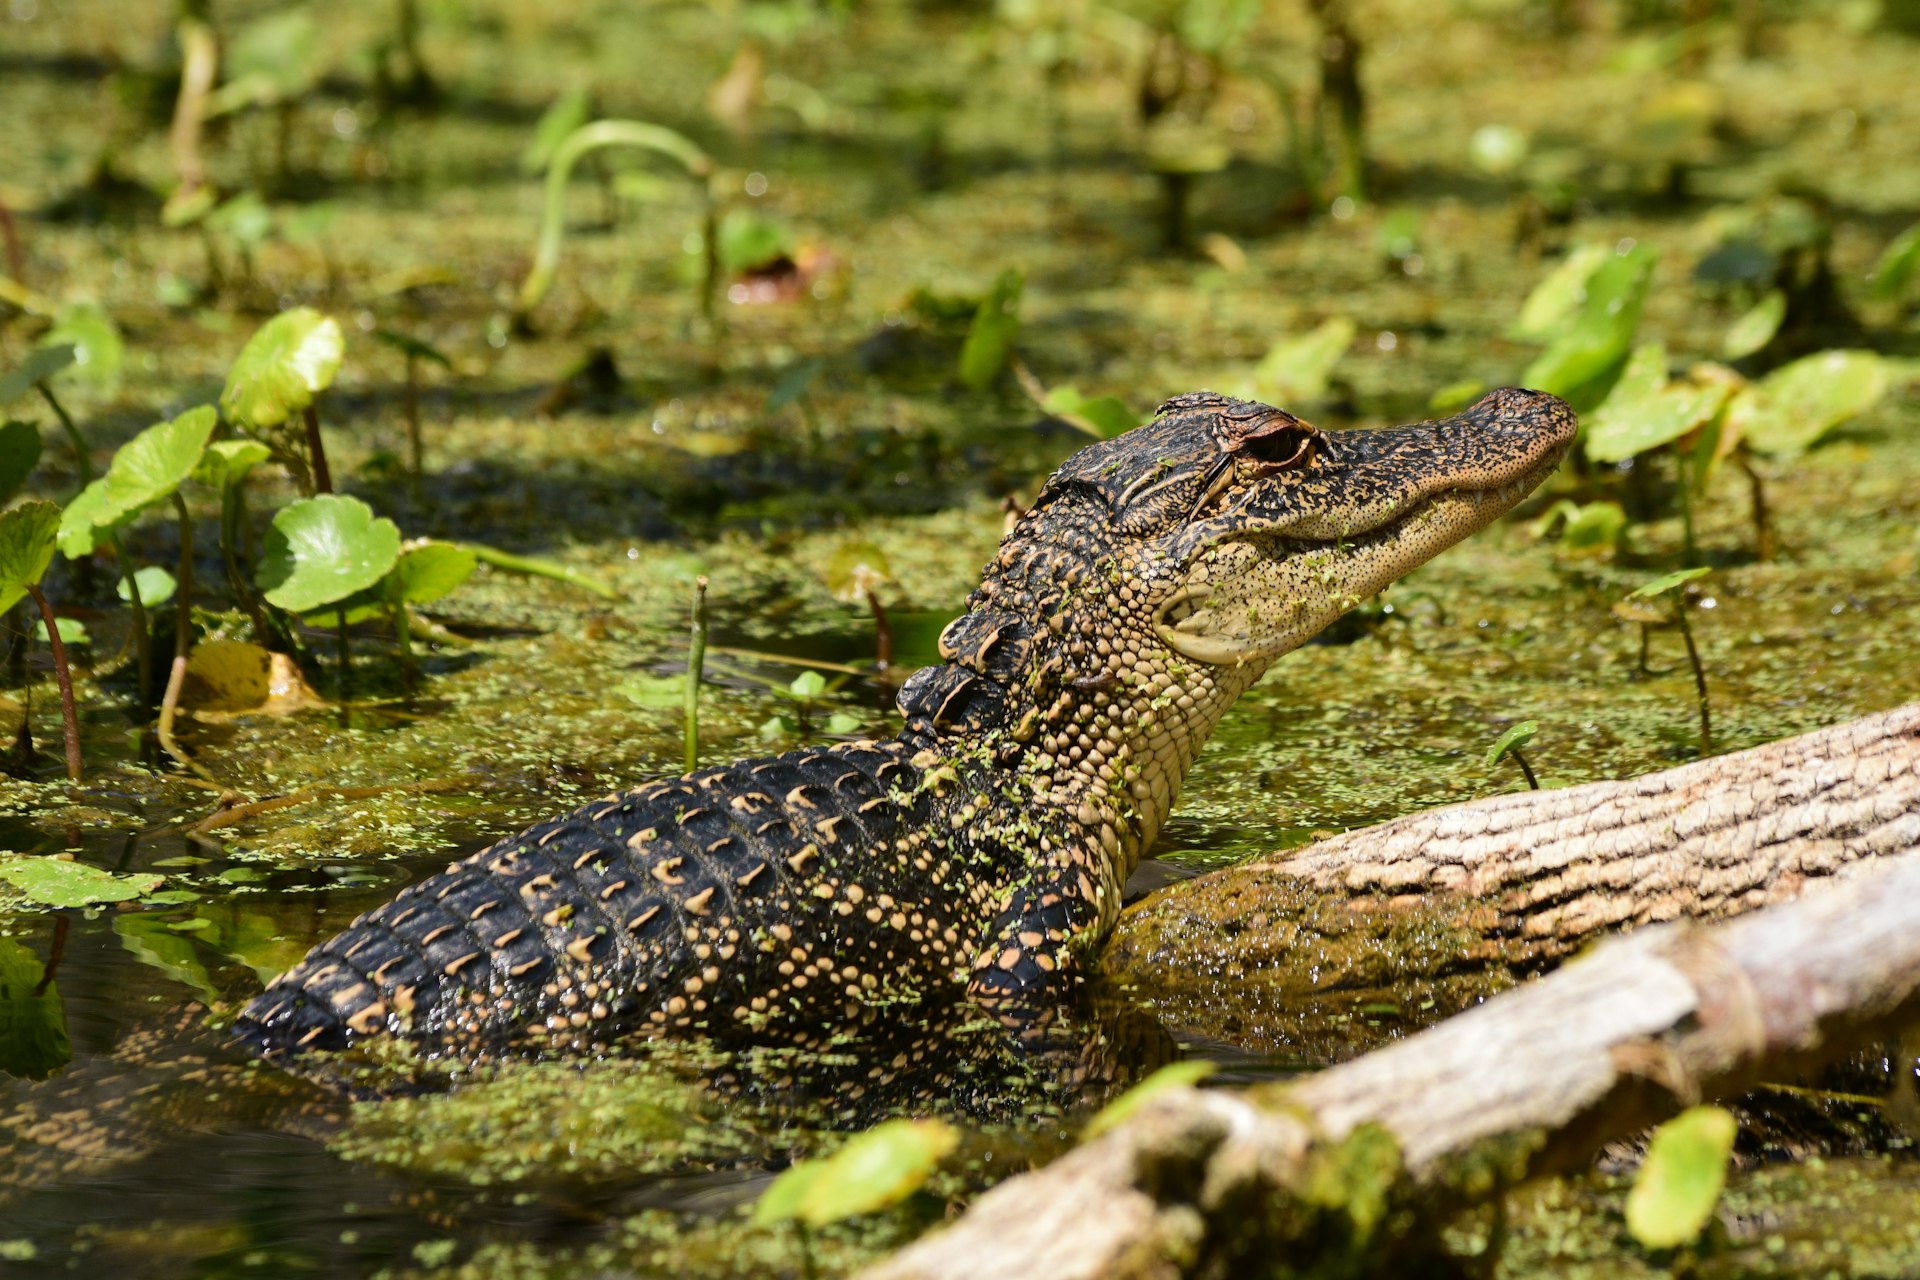 Young alligator partly out of water, sunning on branch